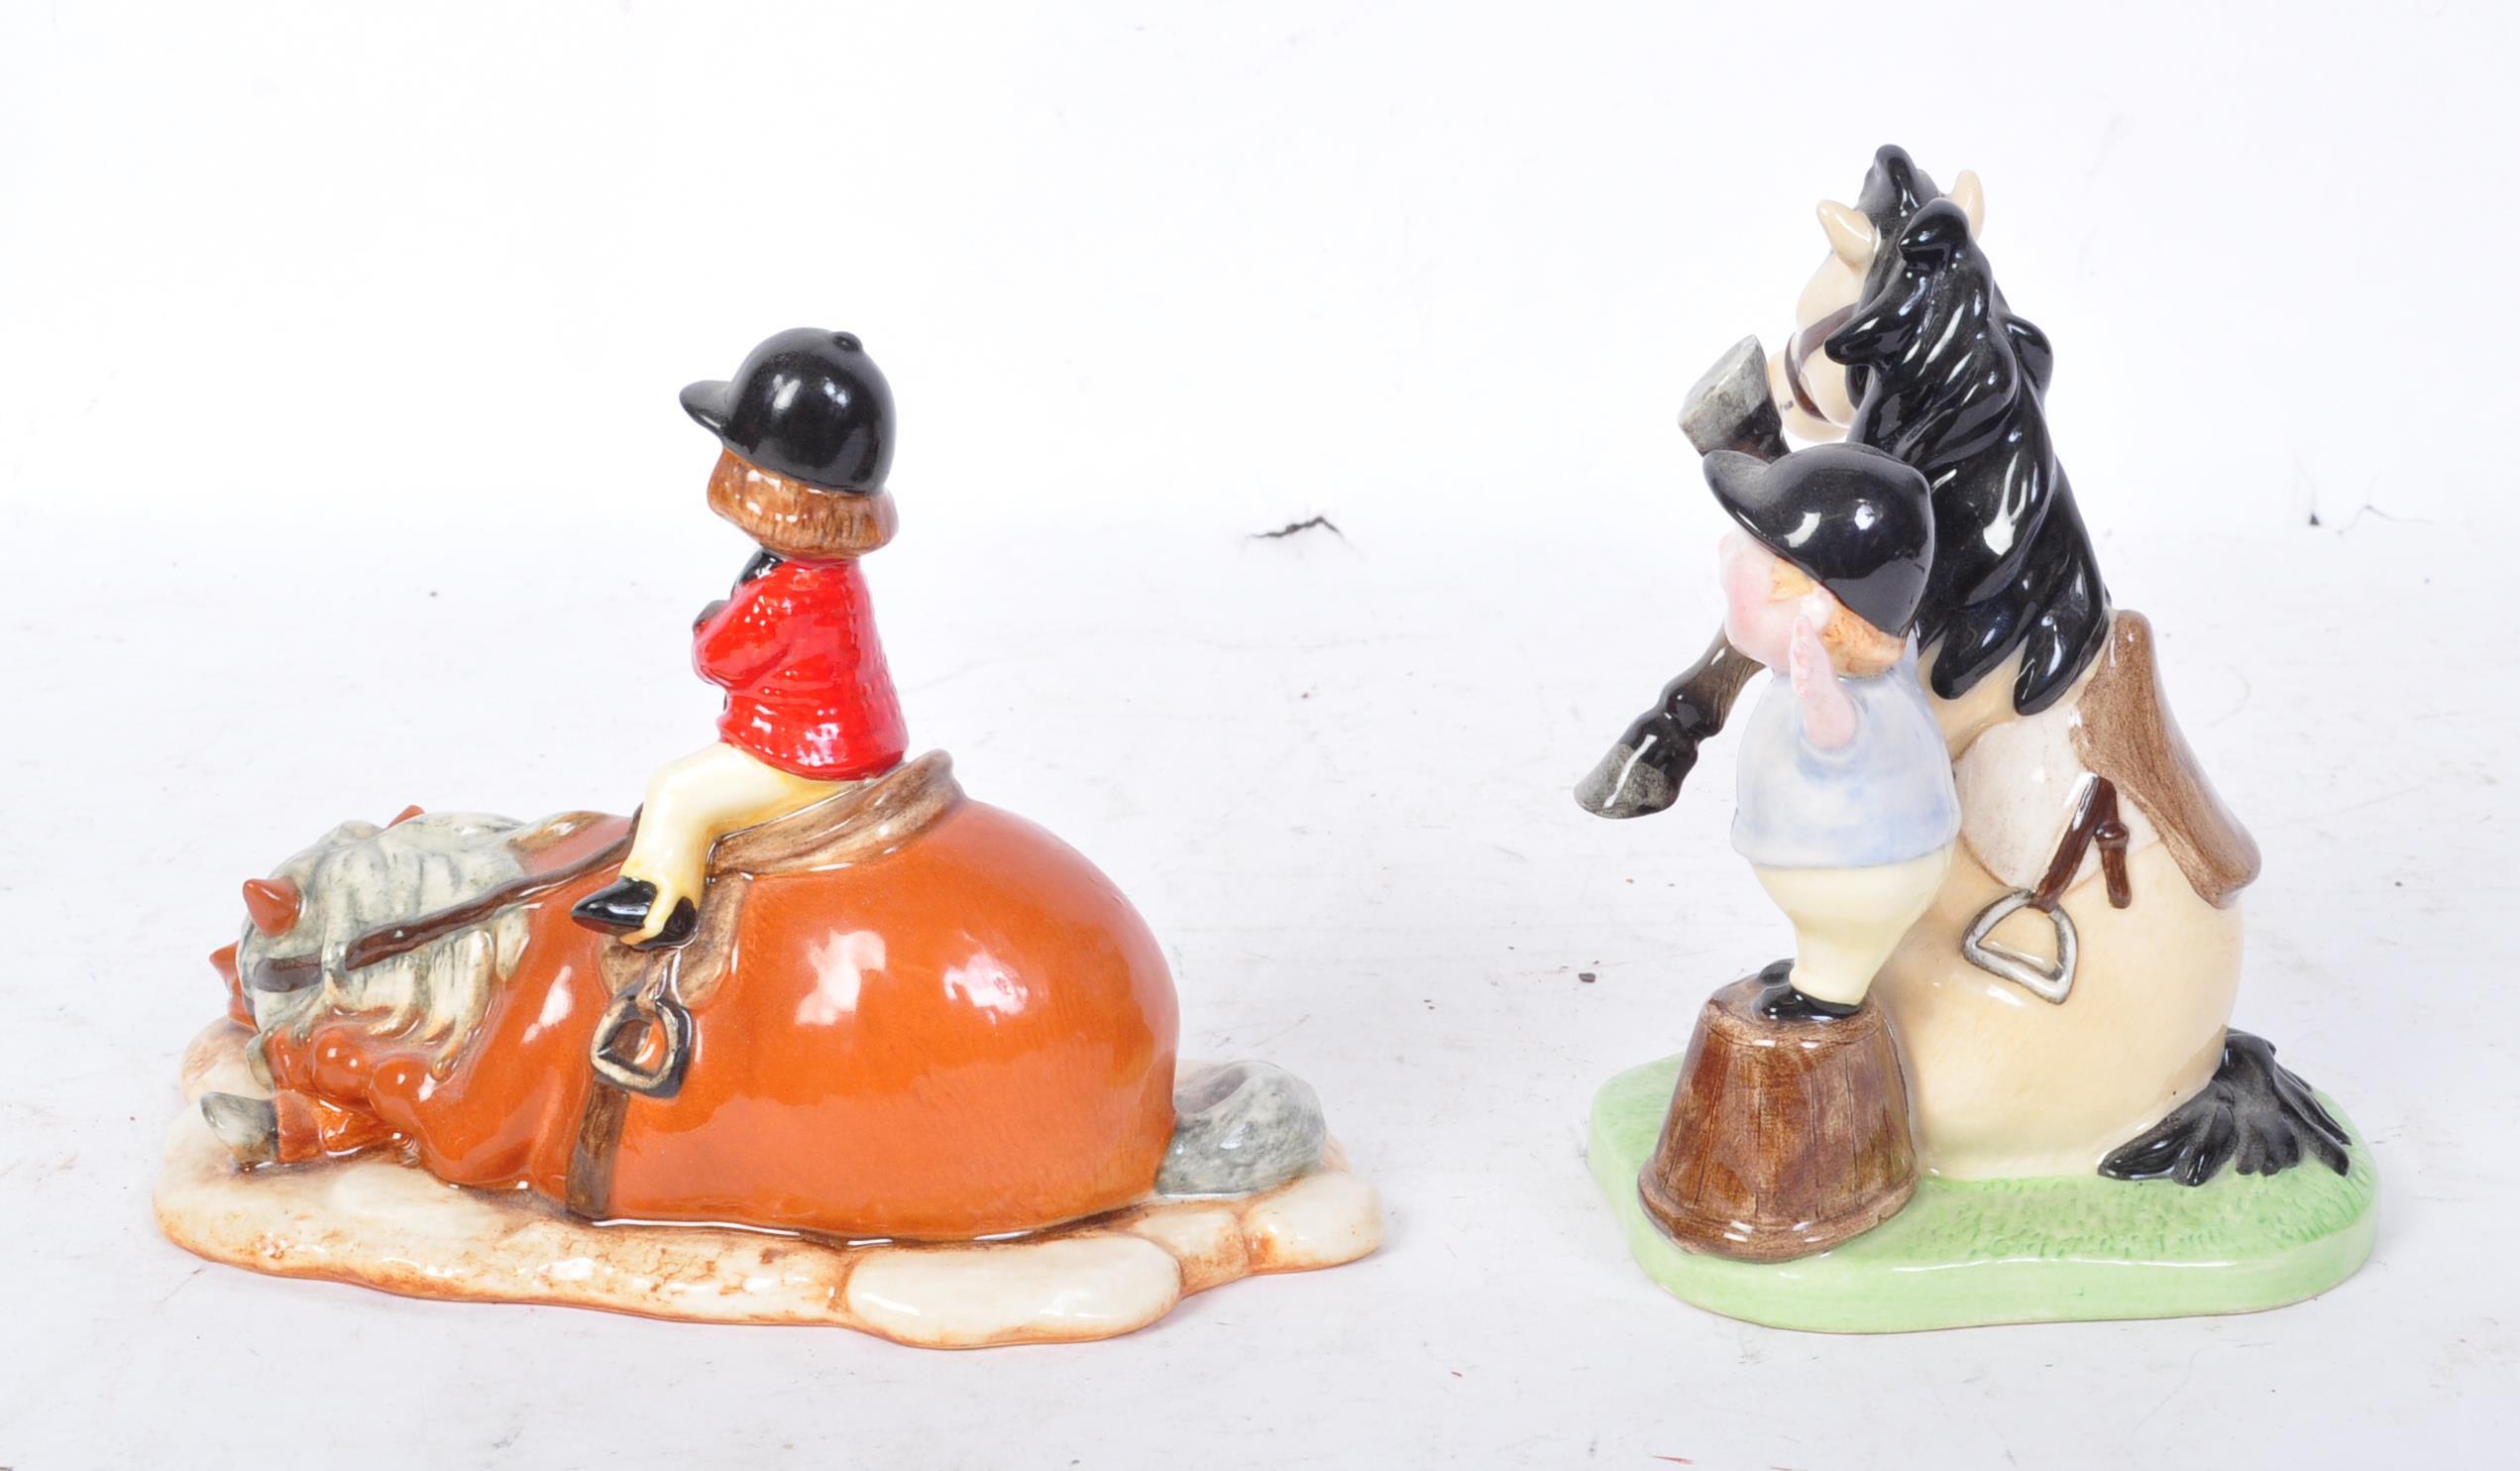 TWO ROYAL DOULTON NORMAN THELWELL HORSE FIGURES - Image 4 of 5